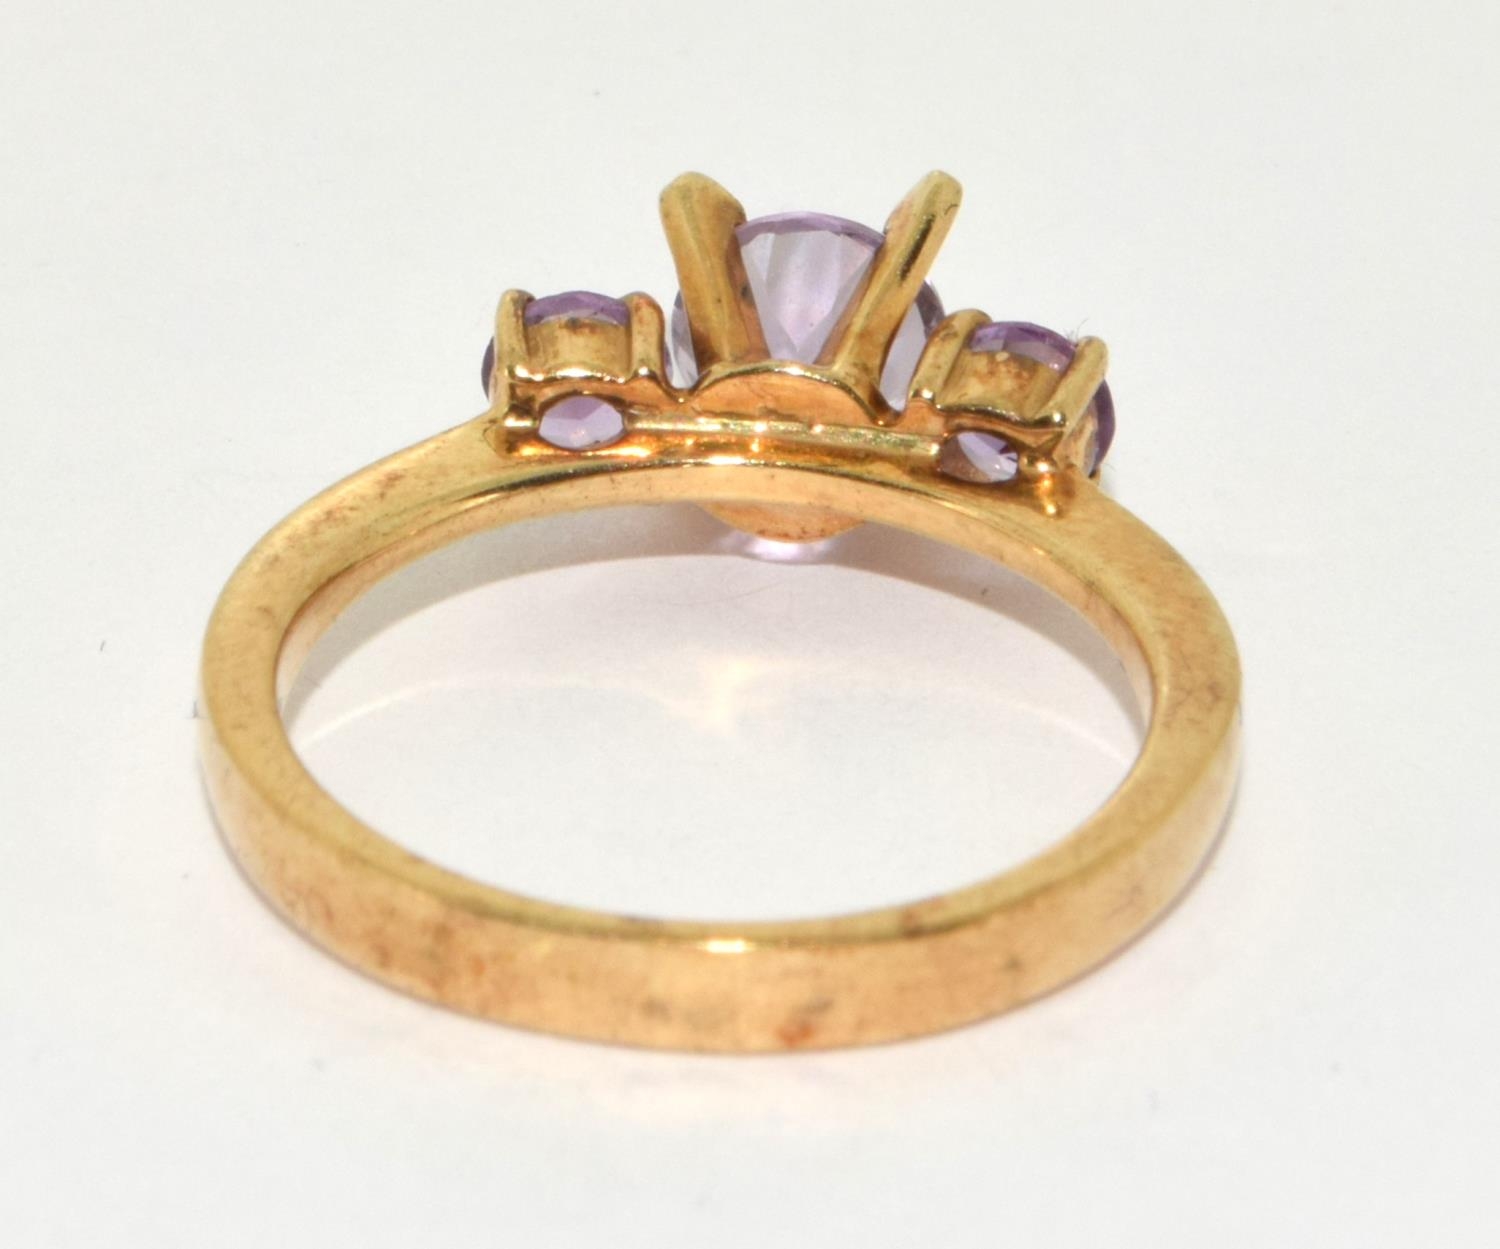 9ct gold ladies 3 stone Amethyst and tanzanite ring size N - Image 3 of 5